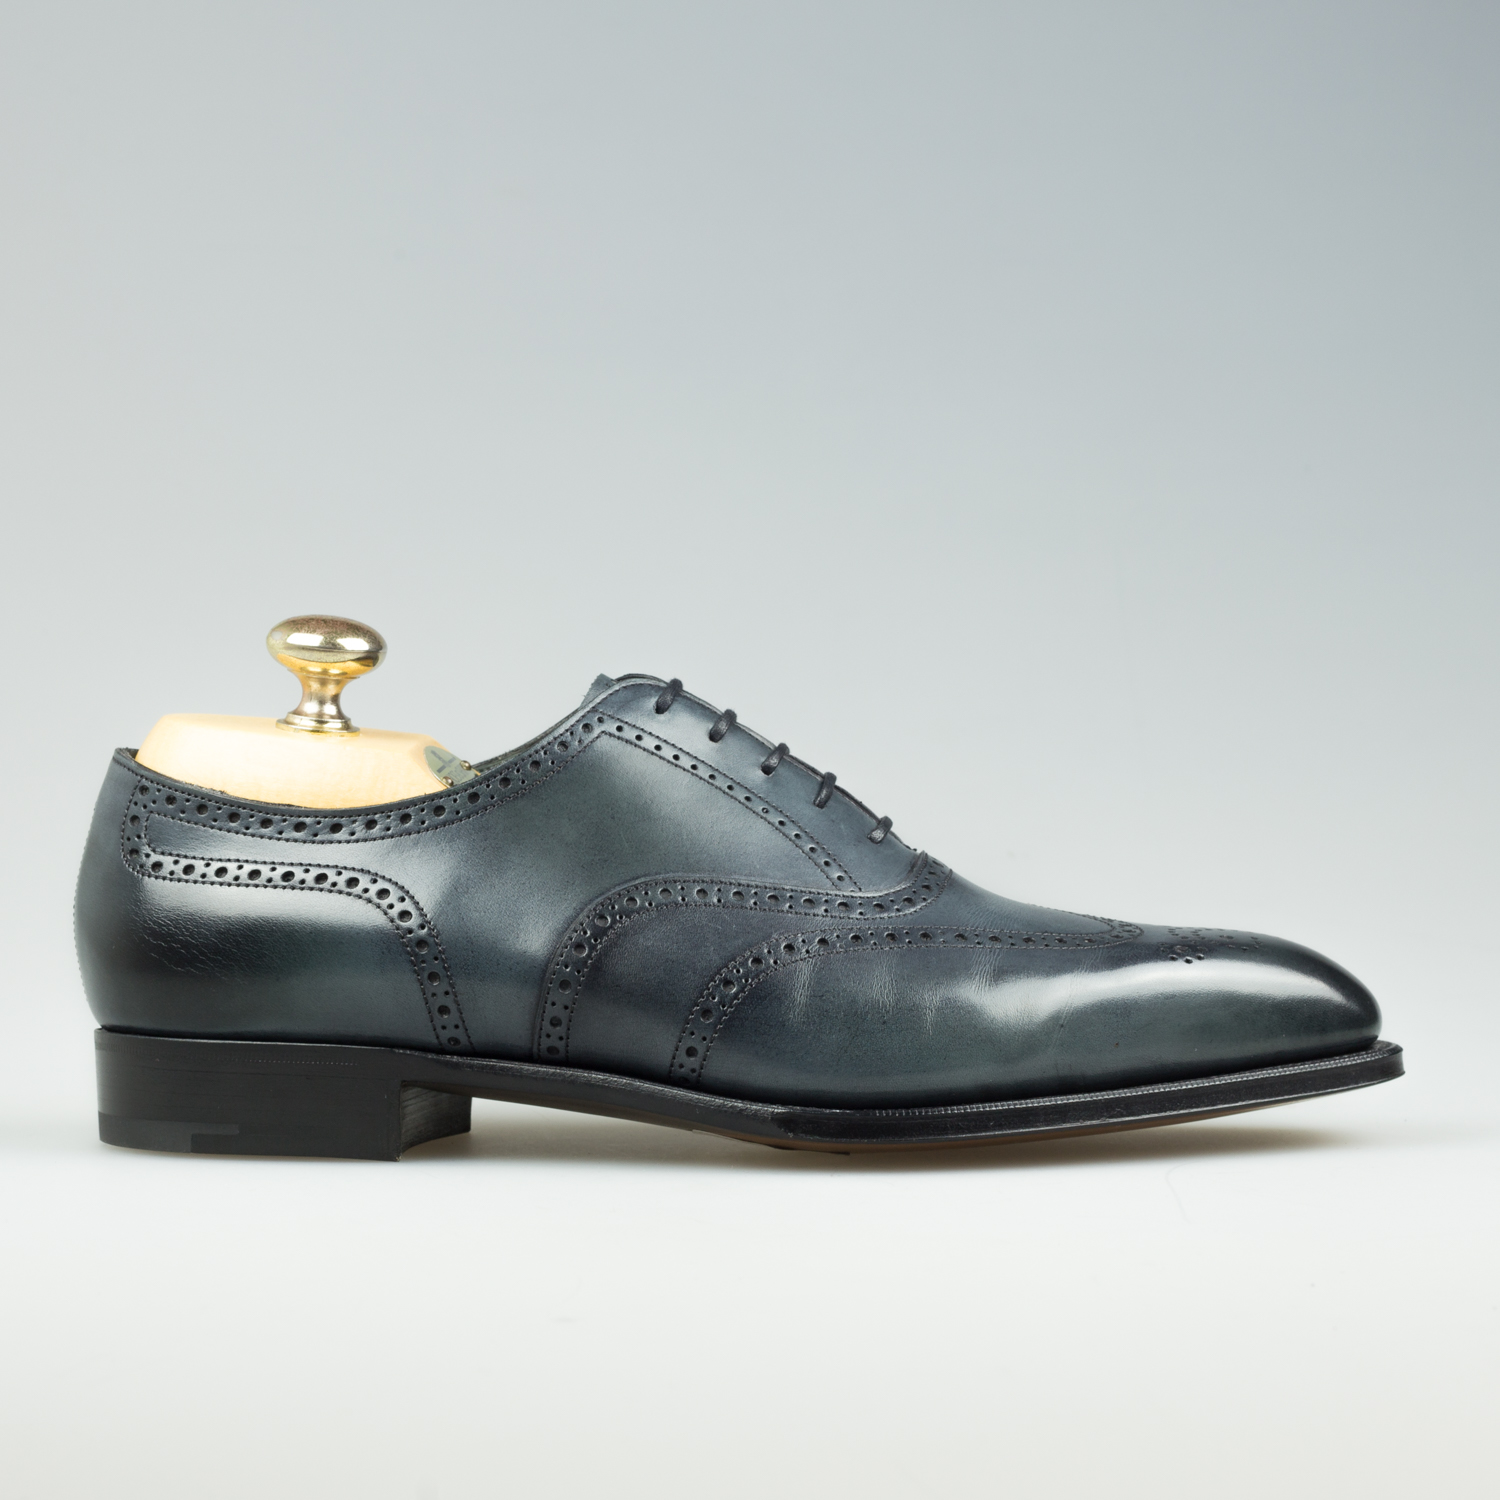 Edward Green Inverness - Shoes - Shoes - Shoes & Shirts